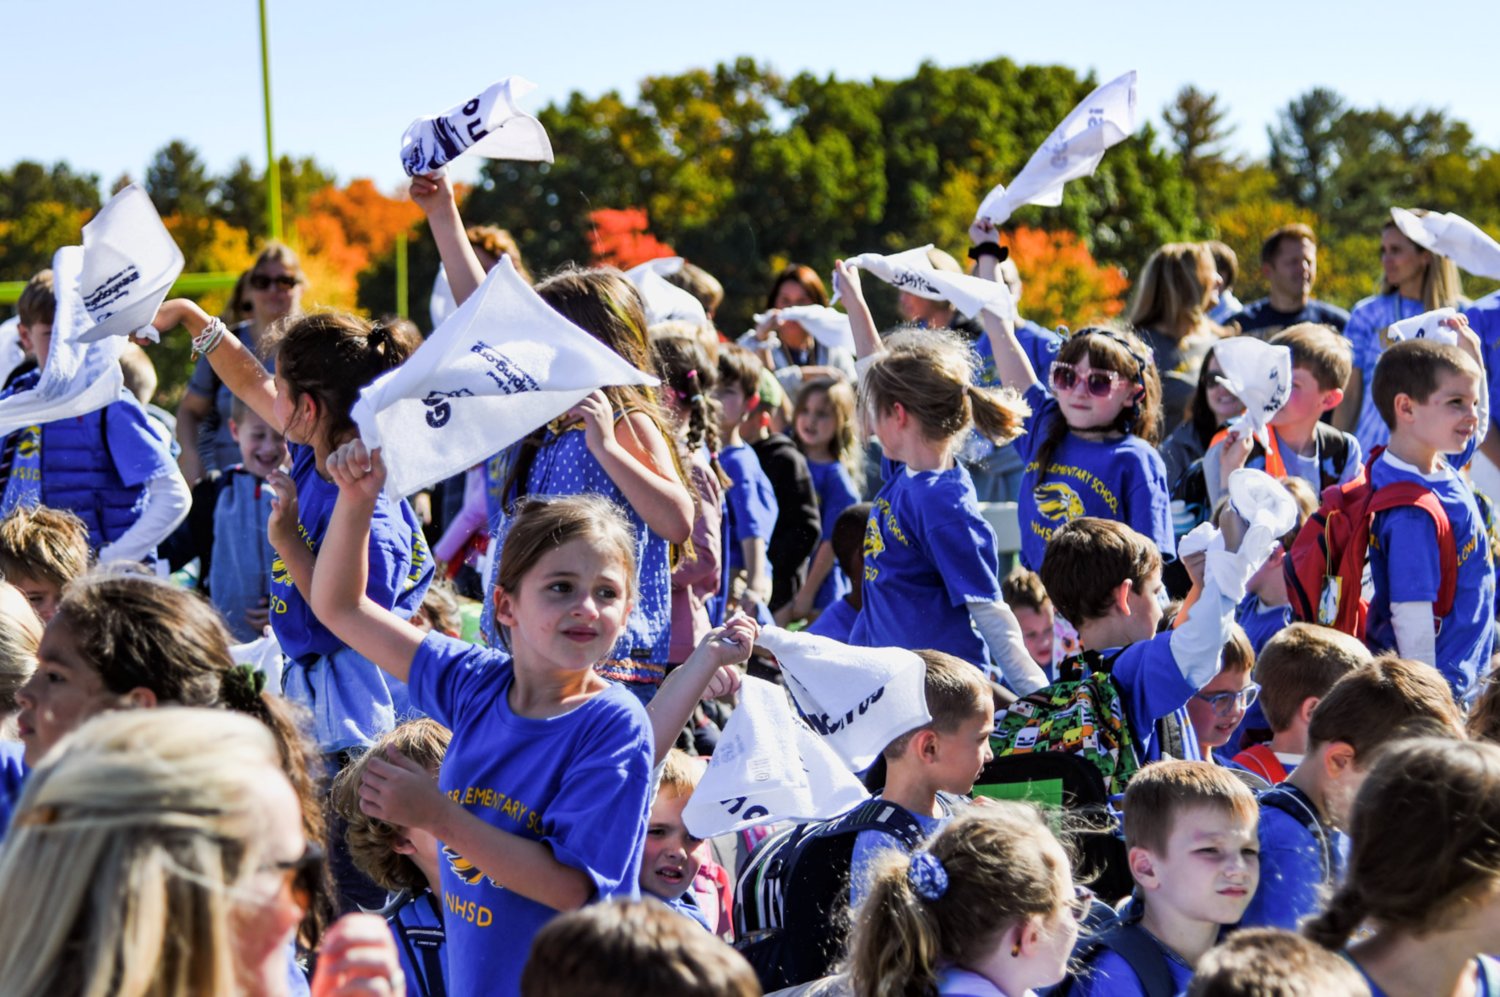 New Hope-Solebury students wave rally towels at the first-ever districtwide pep rally, which welcomed all 1,300 students from kindergarten through 12th grade to join together on its brand-new turf field Oct. 14.